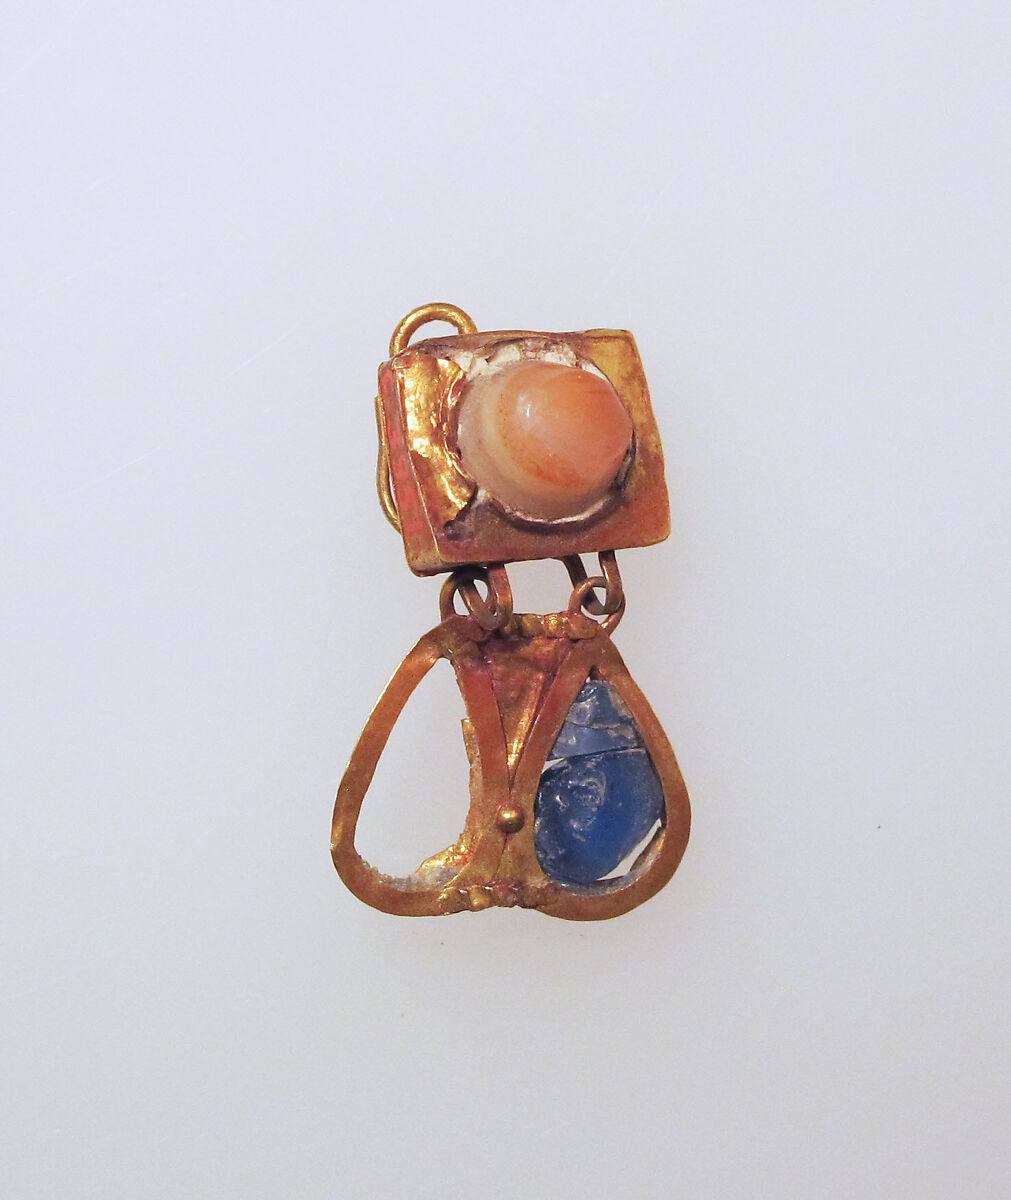 Earring-hook type, with pendants and agate setting, Gold, agate 